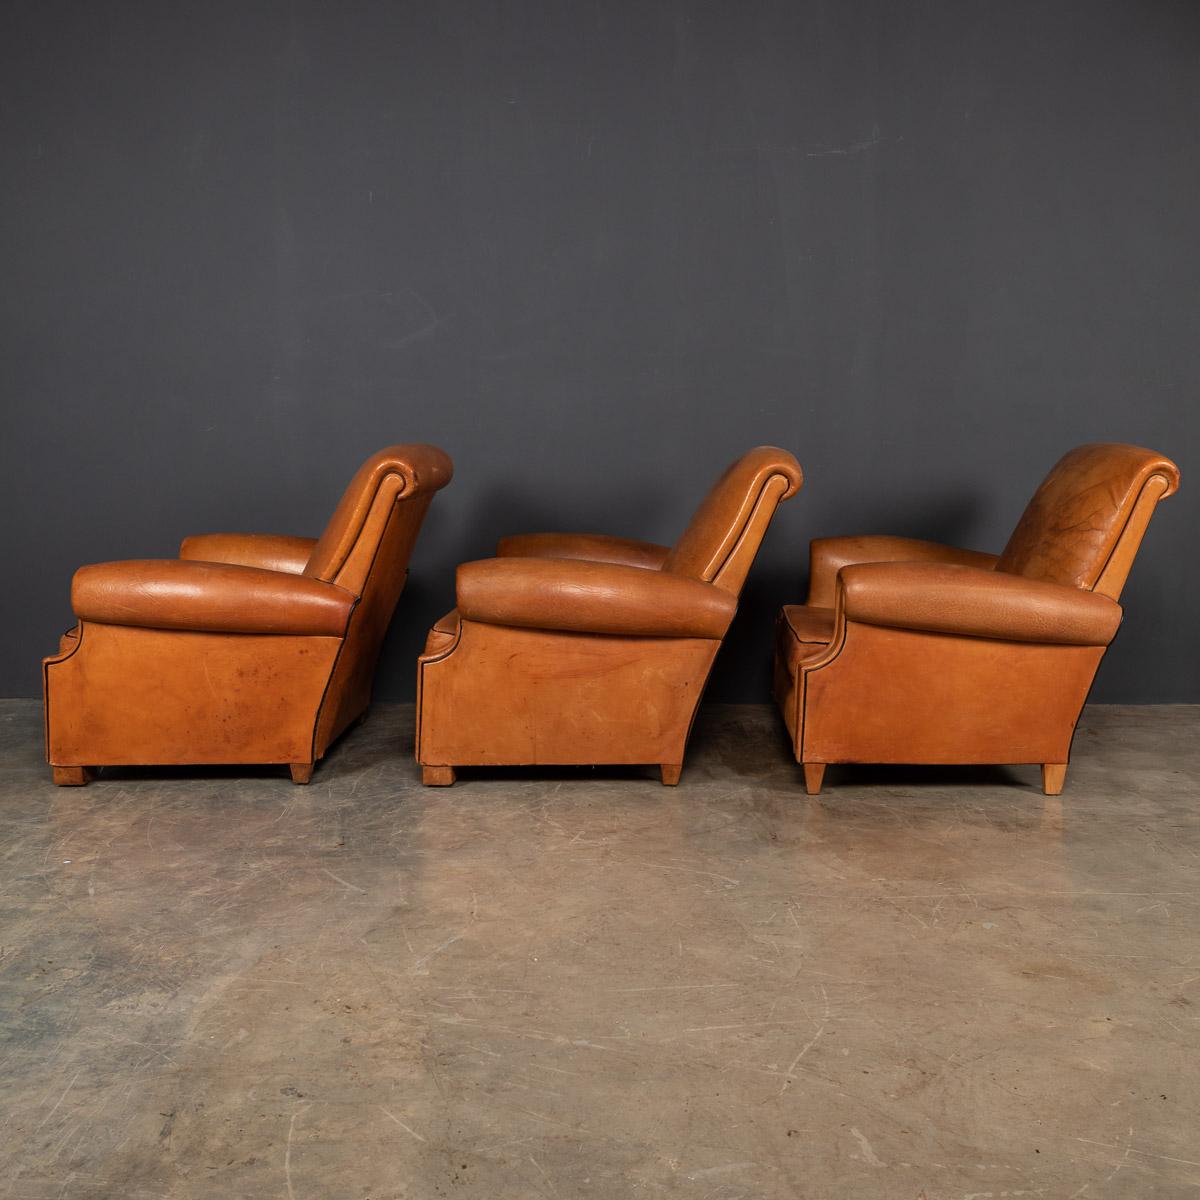 Sheepskin 20th Century French Set Of Three Tan Leather Club Chairs, 1930s